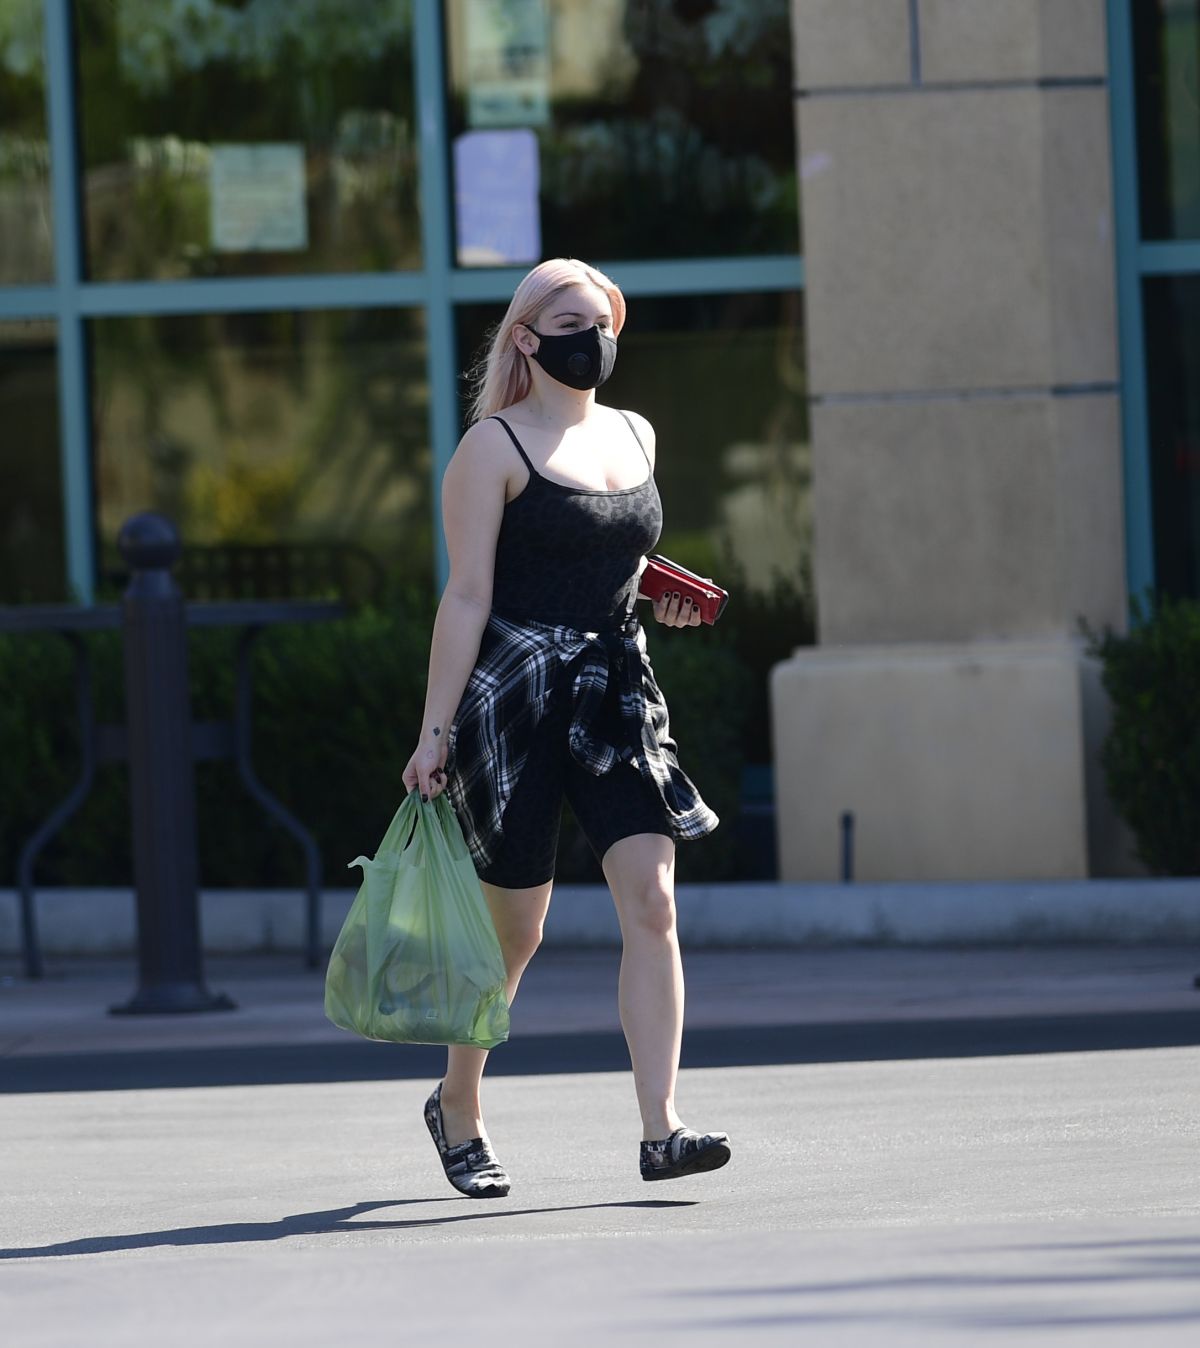 Ariel Winter Shopping for Grocery in Los Angeles 2020/09/19